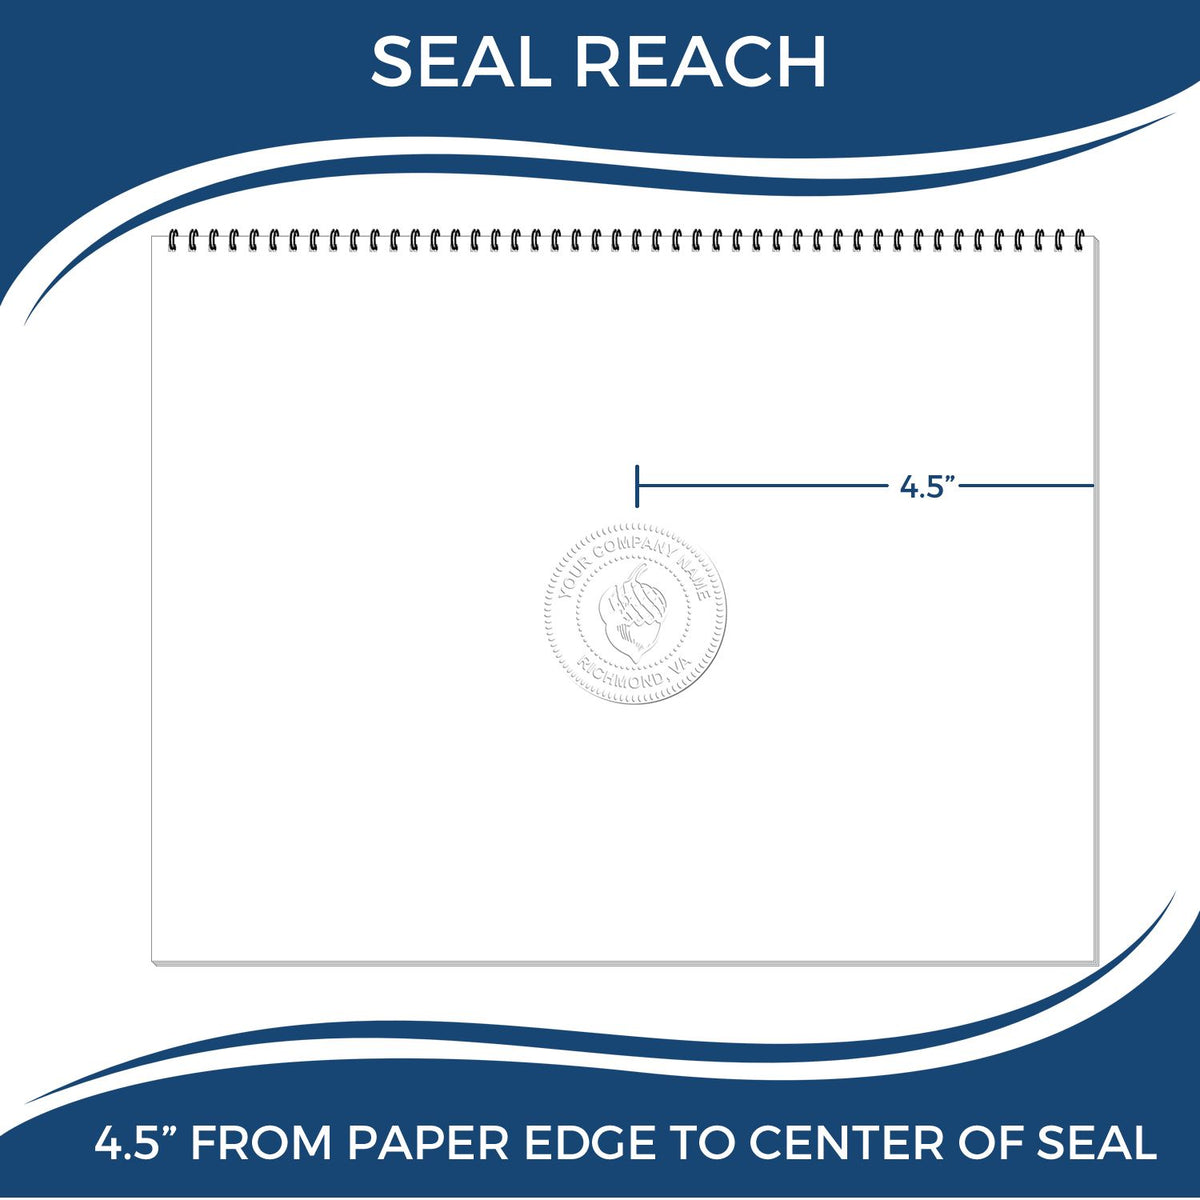 An infographic showing the seal reach which is represented by a ruler and a miniature seal image of the State of California Extended Long Reach Engineer Seal